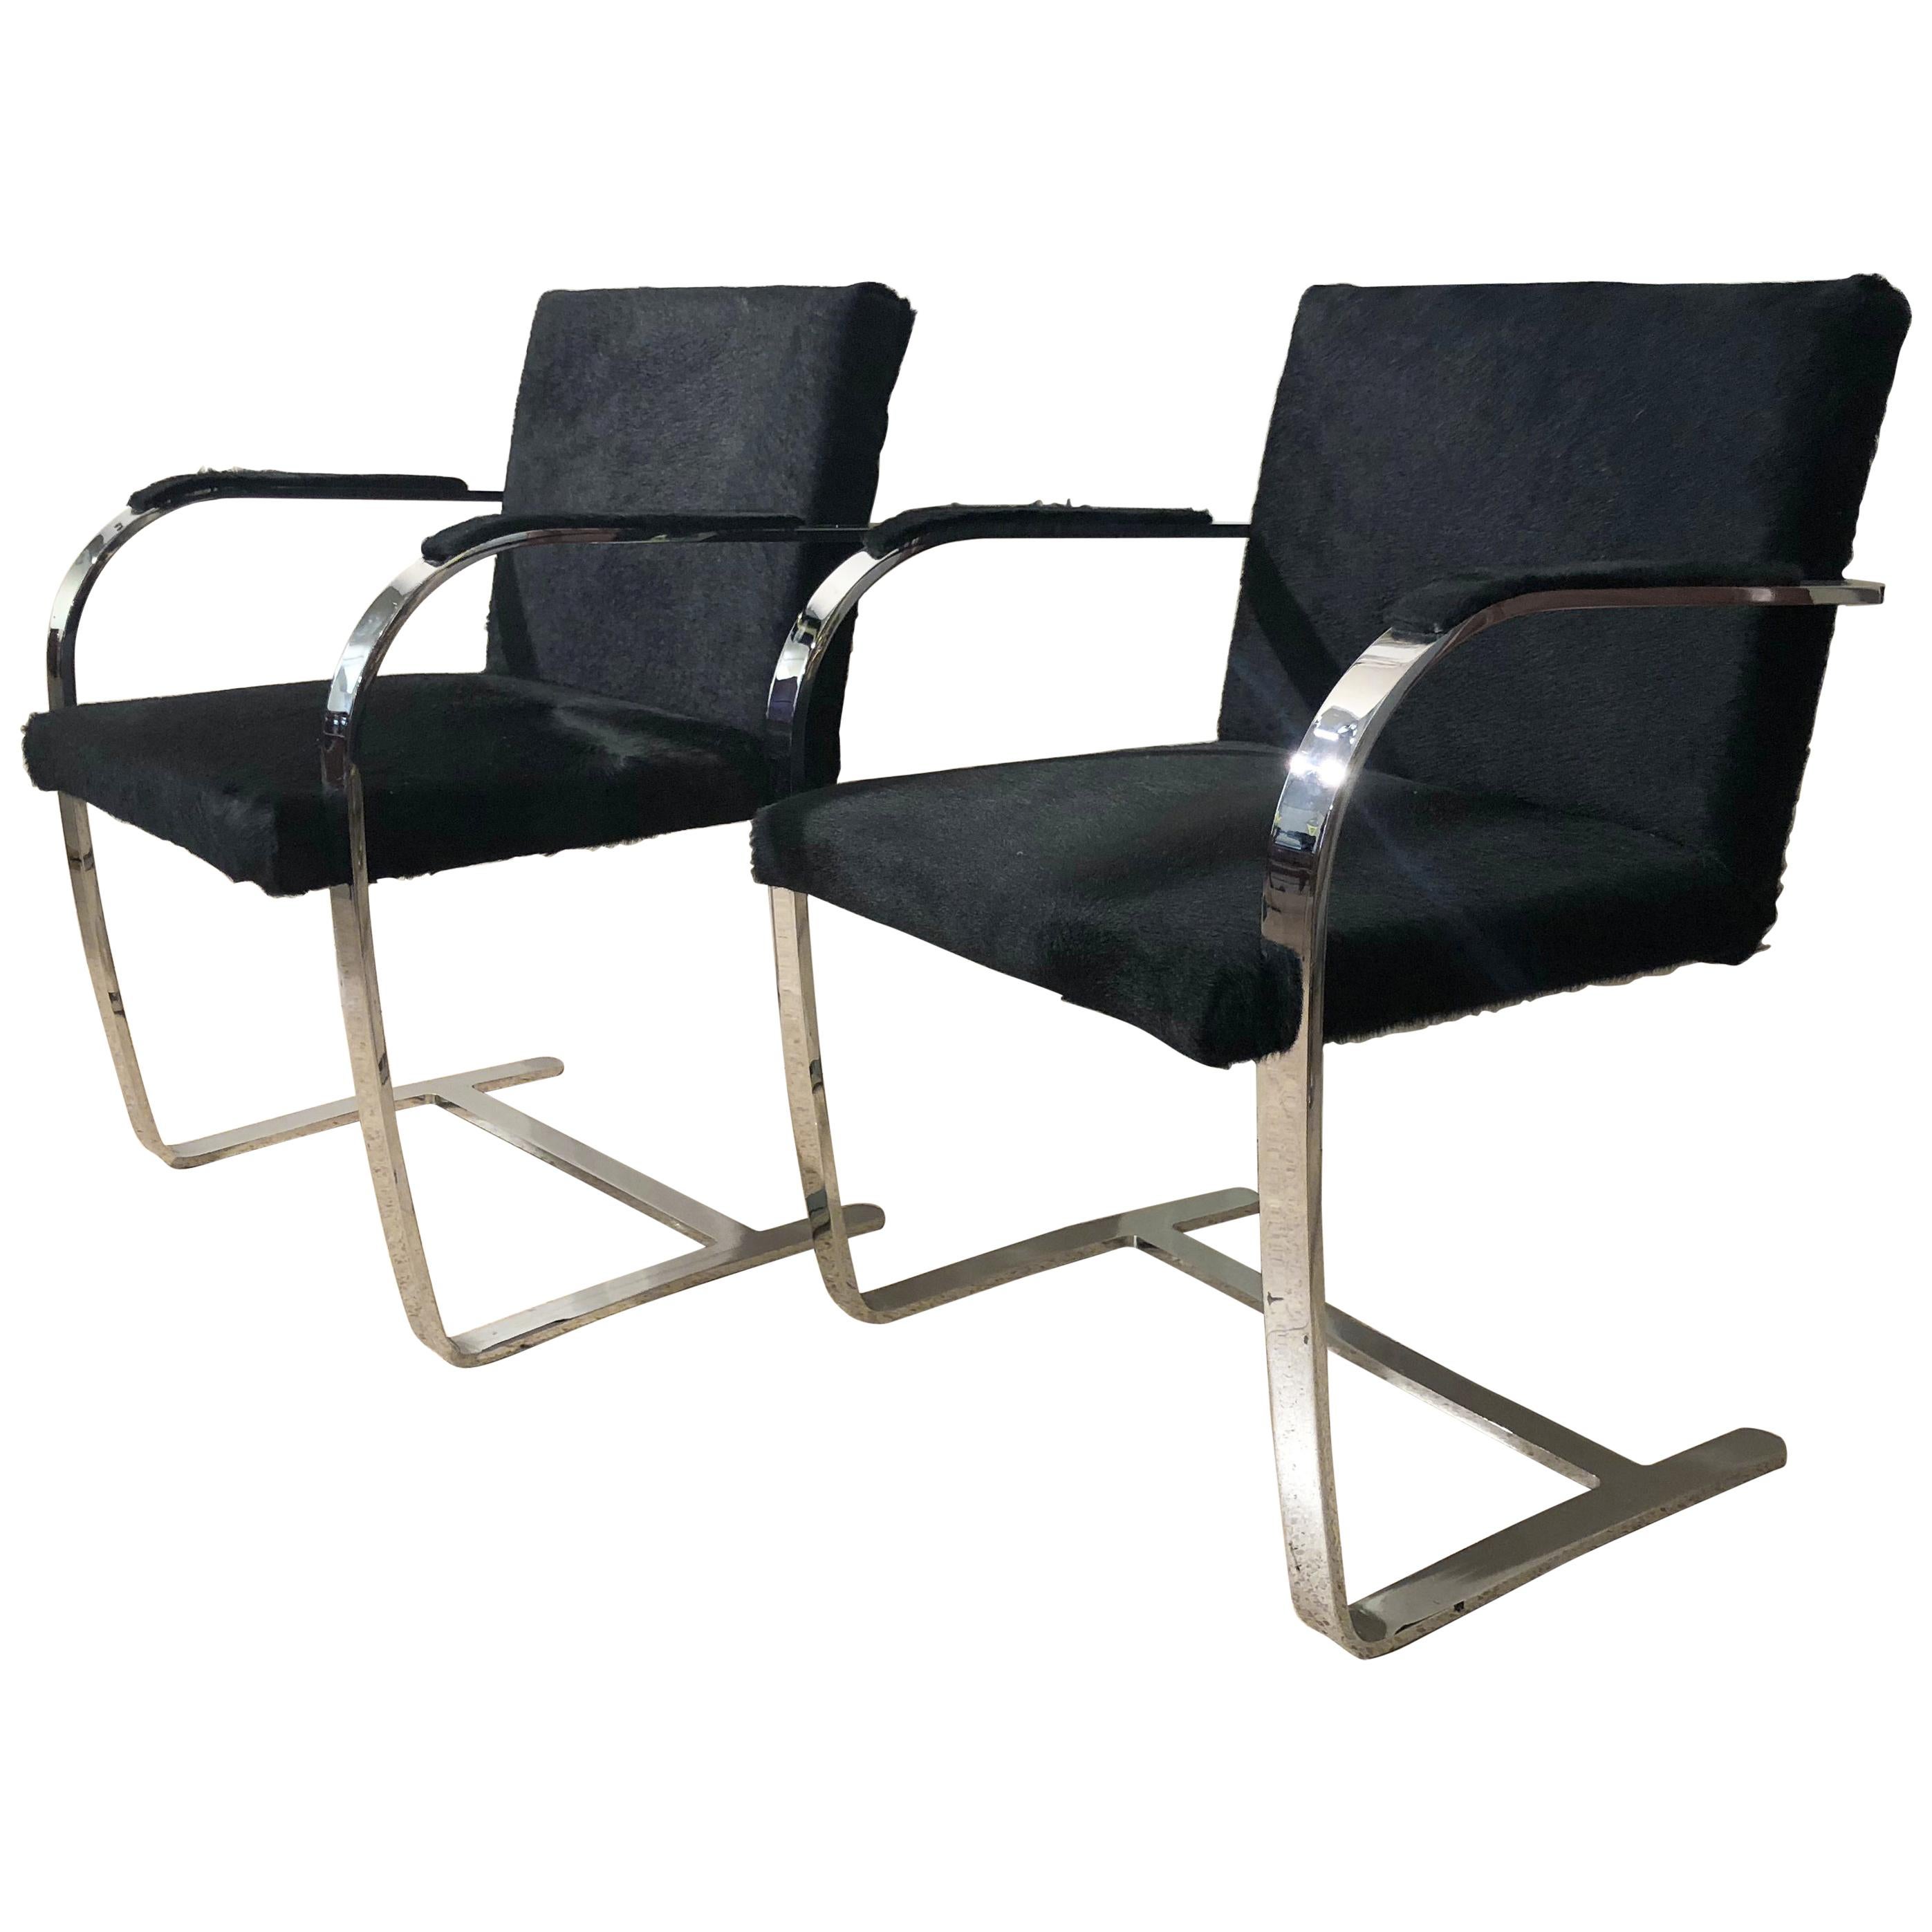 Black Horse Fur Brno Model Knoll Chairs with Armrest, Knoll Production, 1990s